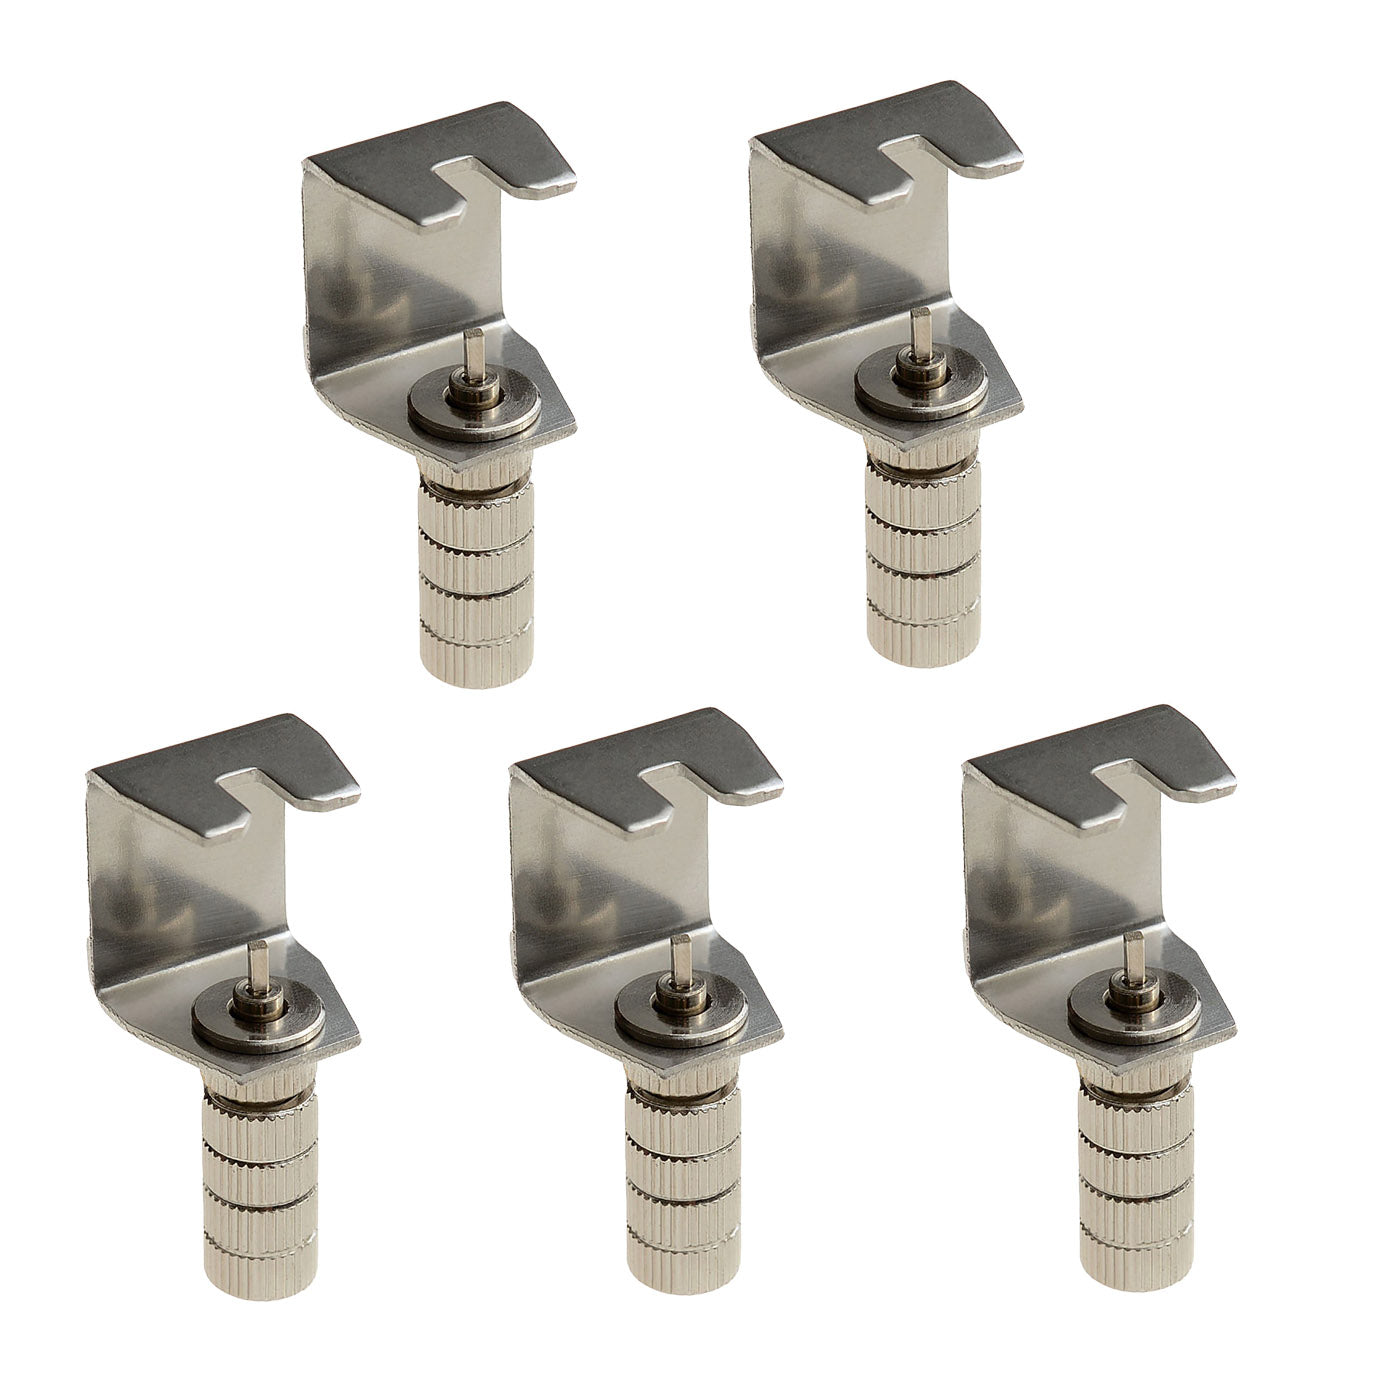 5pcs Dental Wrench Key for High Speed Handpiece Burs Changing - azdentall.com